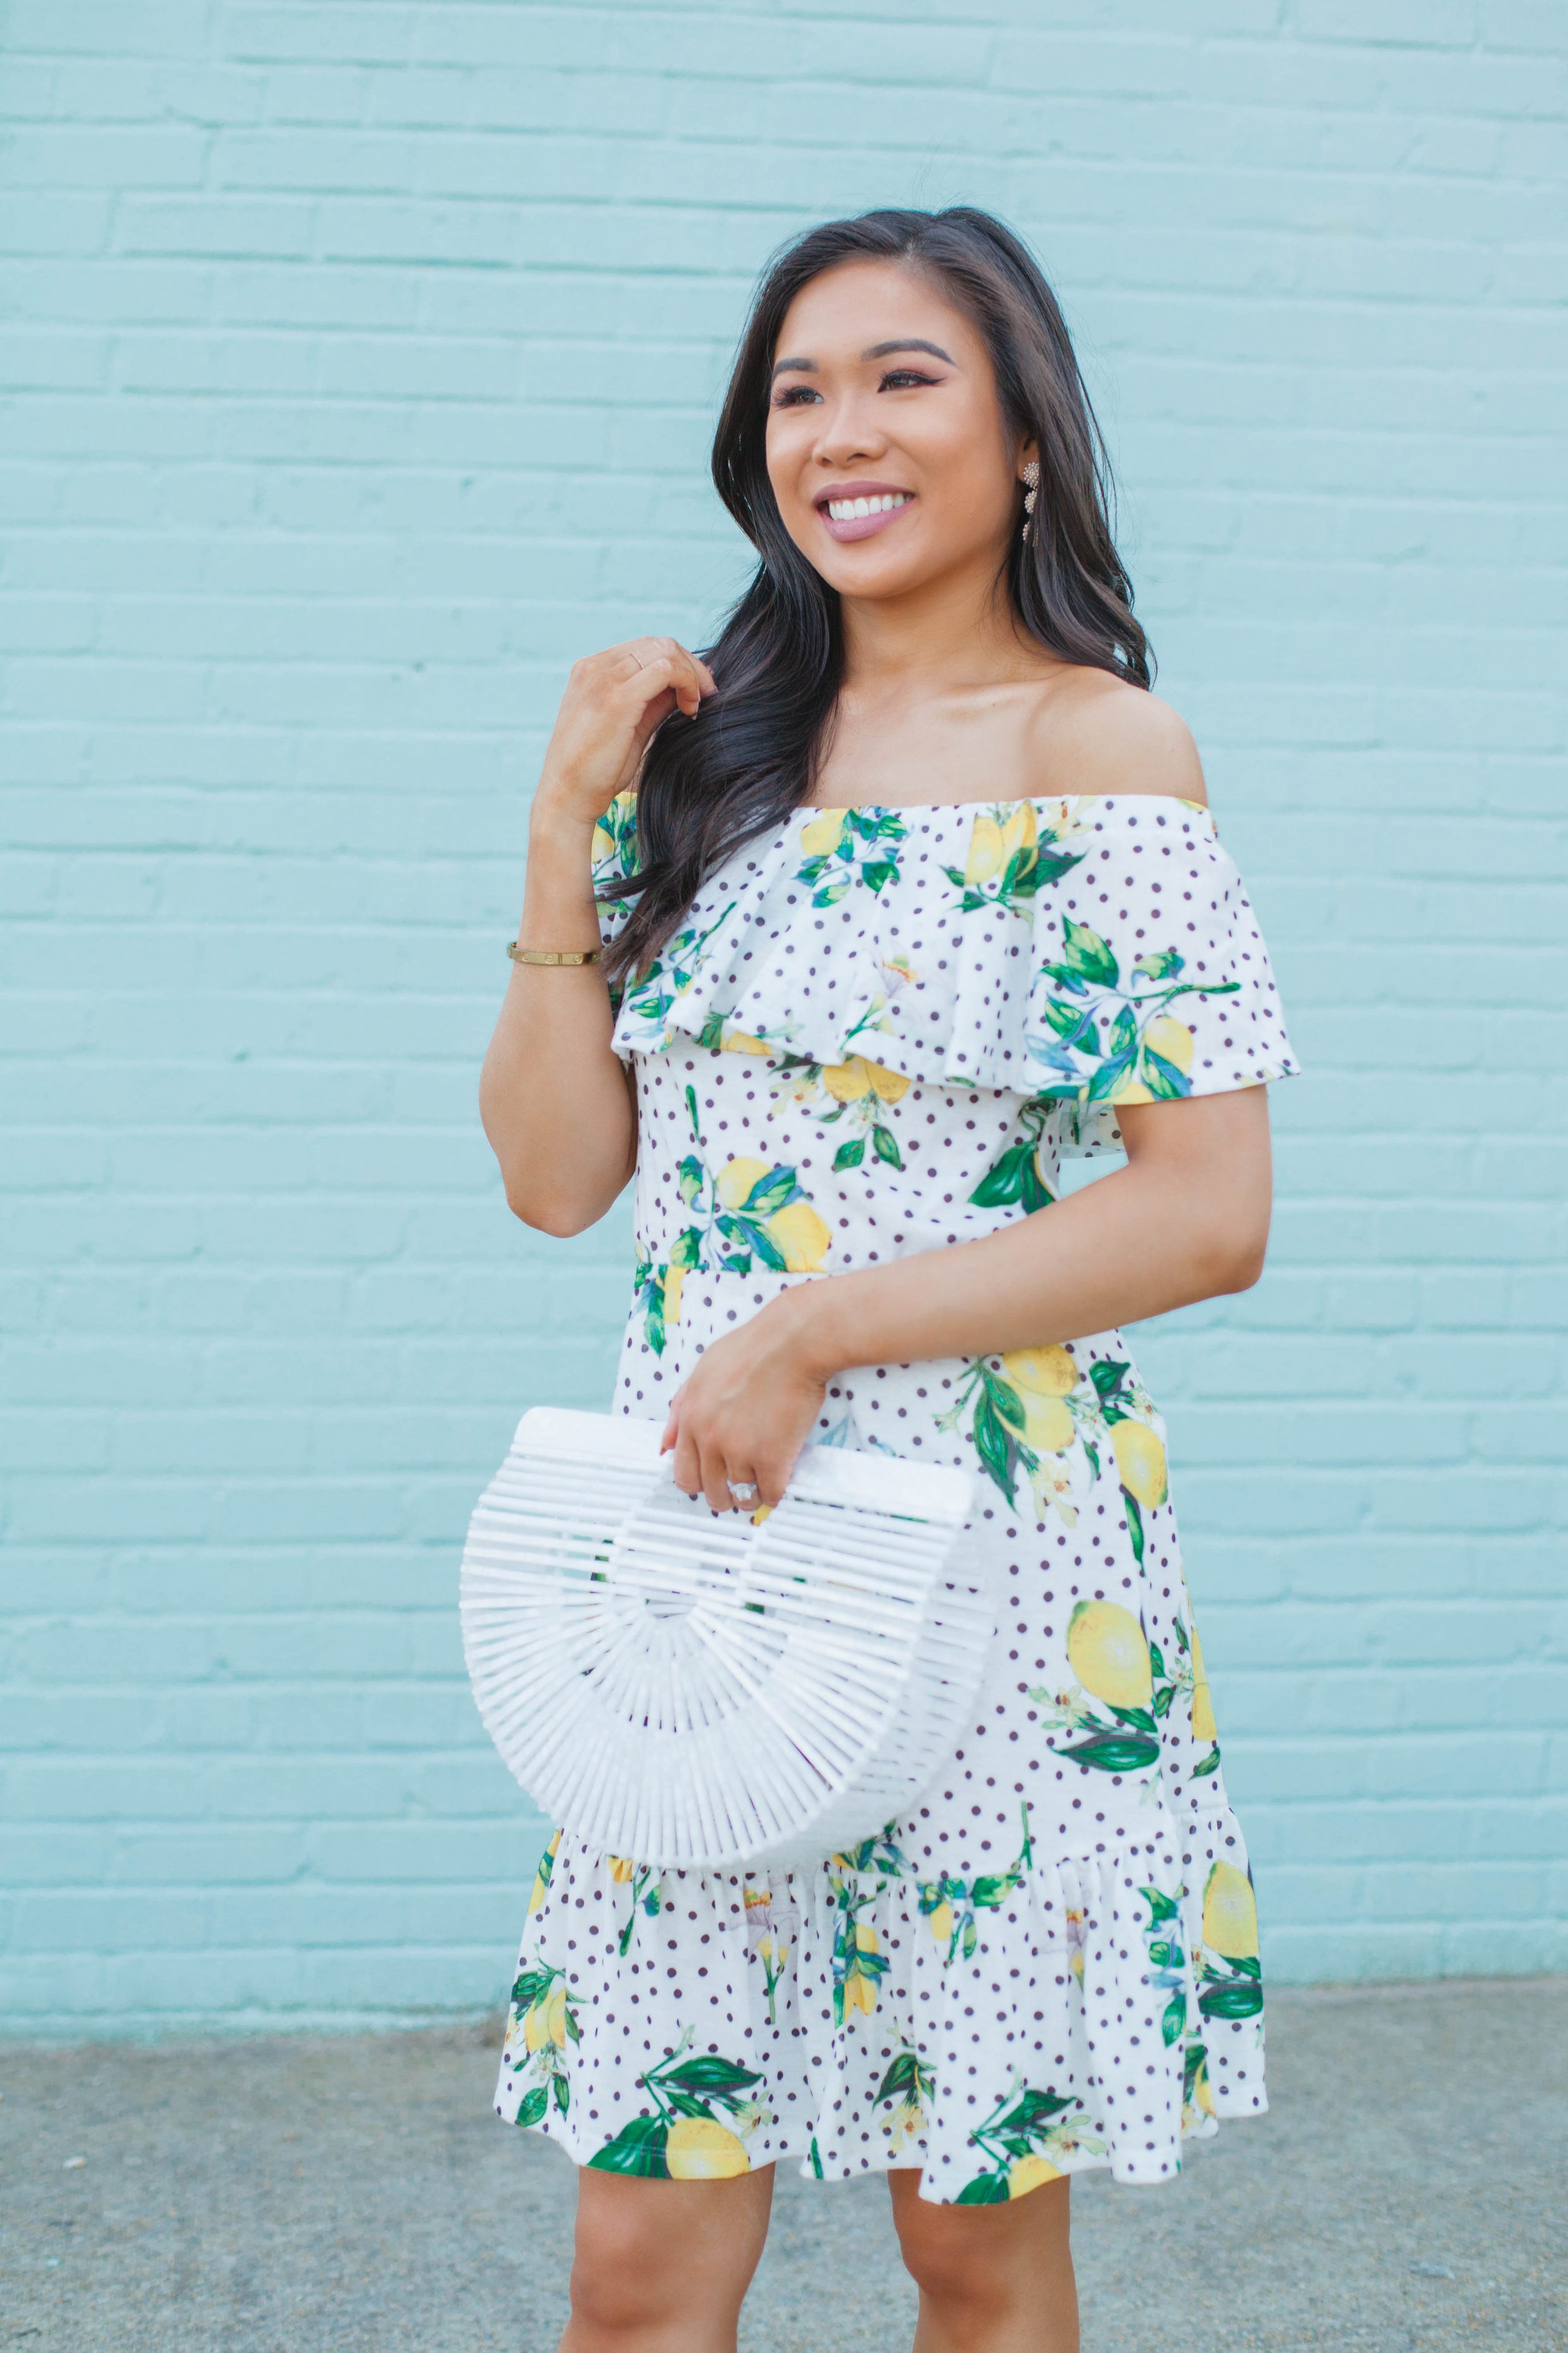 Hoang-Kim wears an off the shoulder lemon print dress with a white acrylic bag for summer